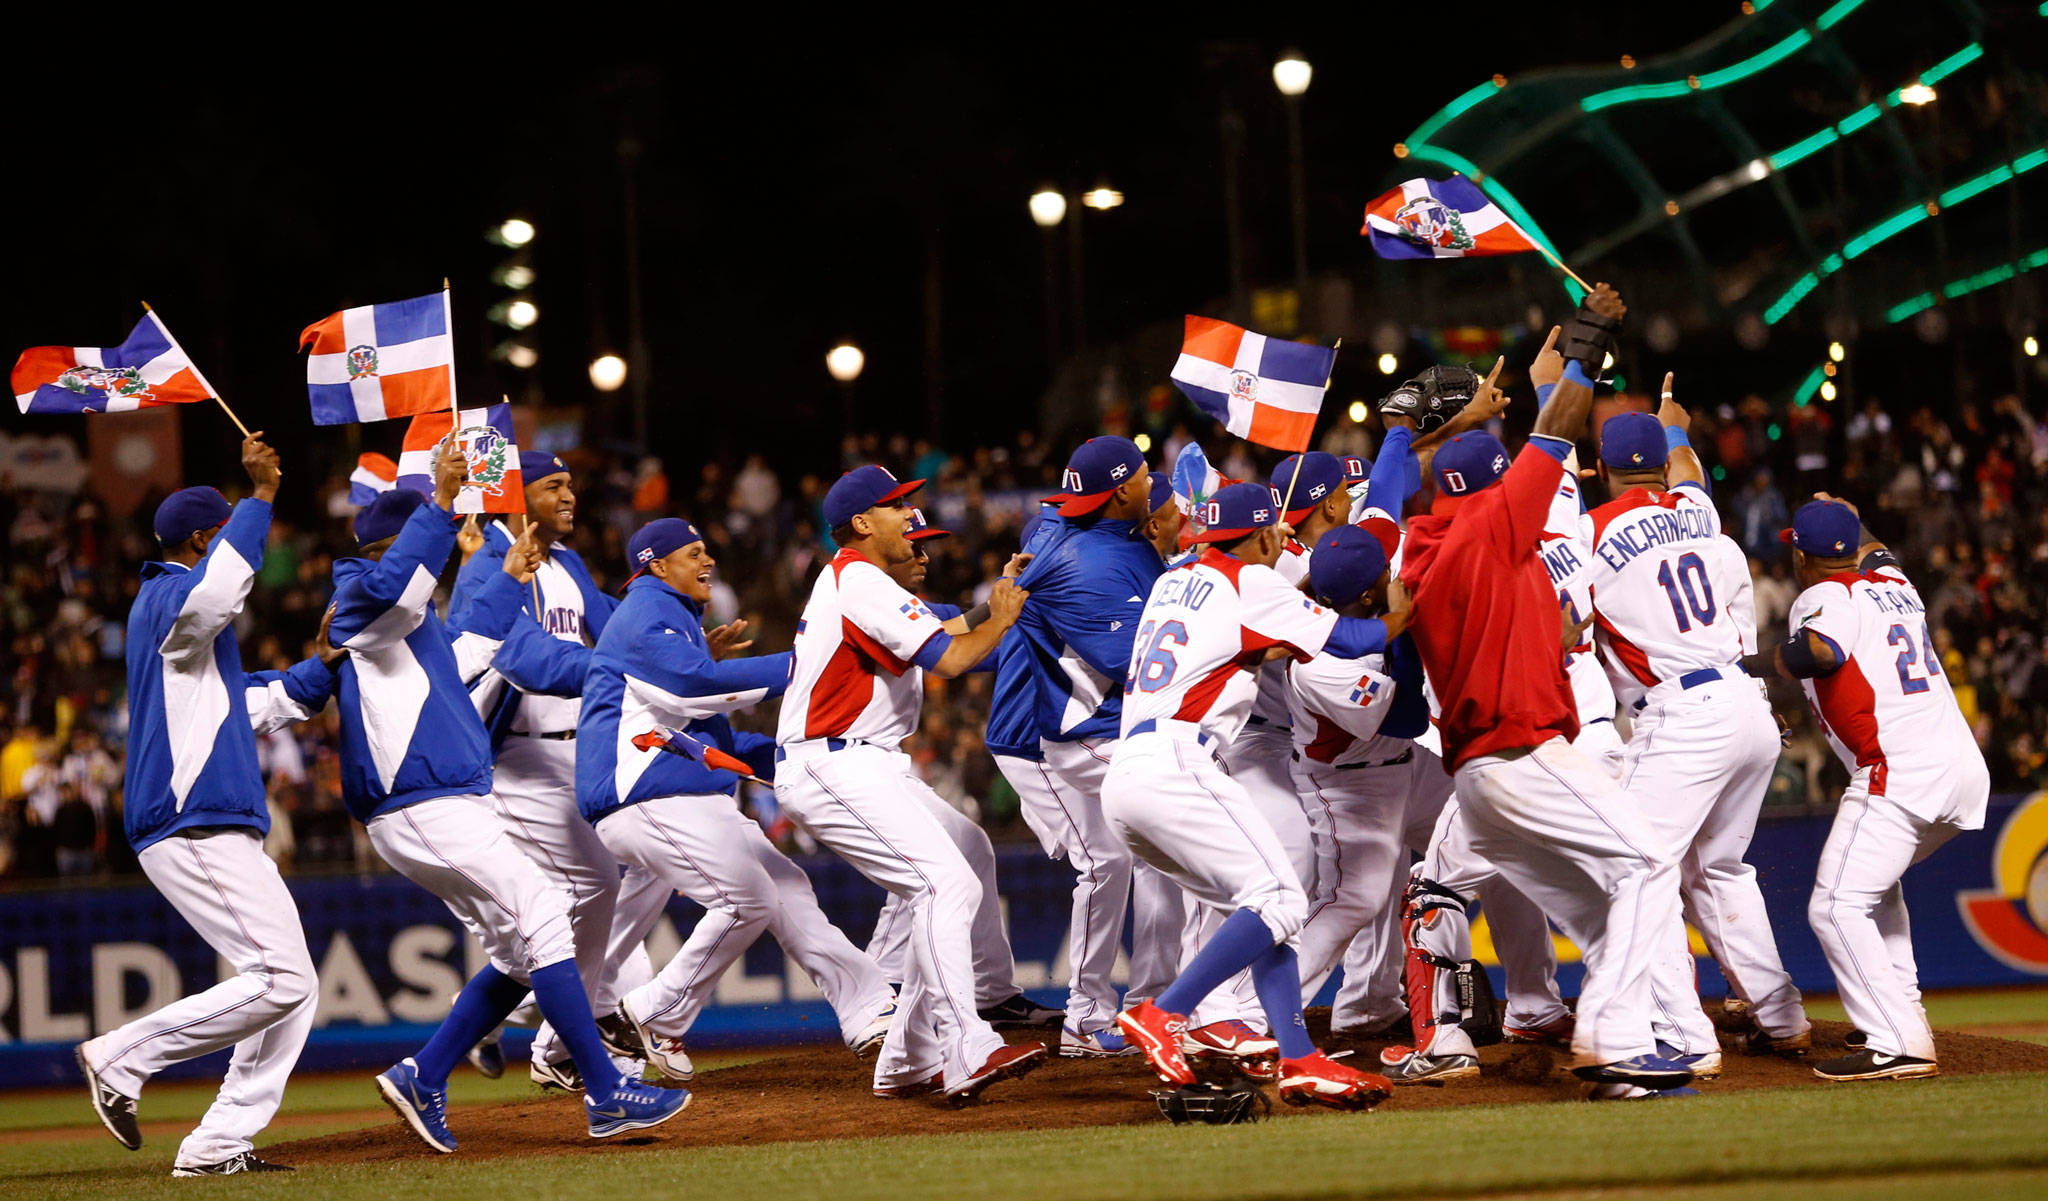 (Josie Lepe | San Jose Mercury News) The Dominican Republic team celebrates its win over Puerto Rico in the 2013 World Baseball Classic championship game at AT&T Field in San Francisco. The Dominicans, along with the United States and other major baseball-playing nations, will kick off WBC play today.